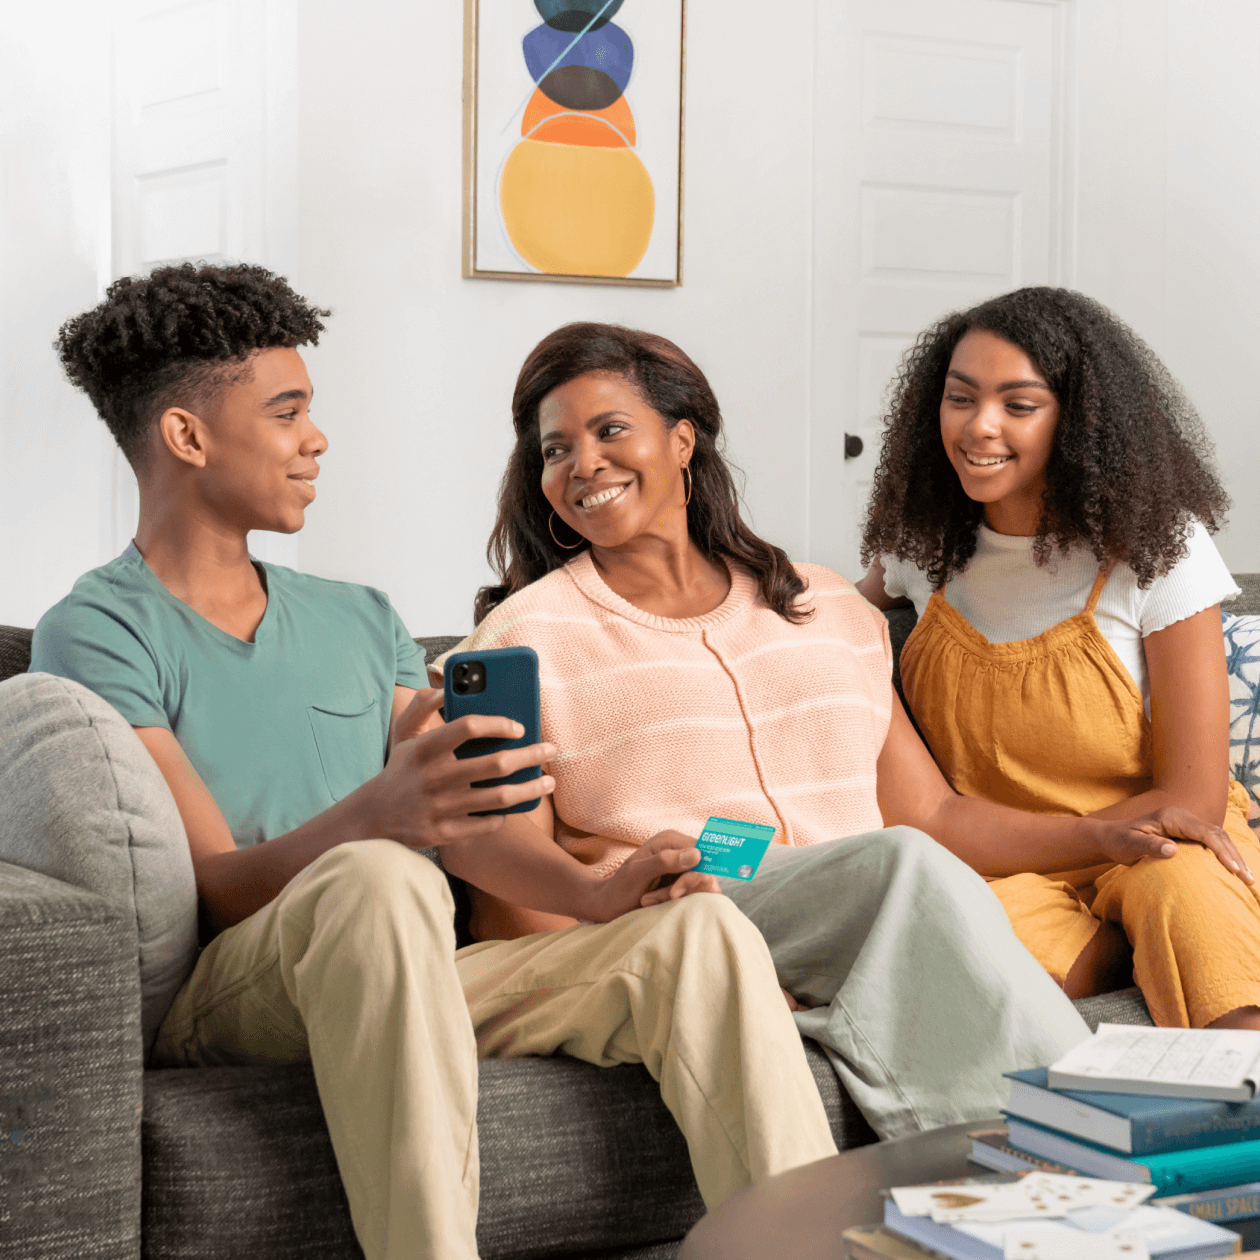 teenage son holding a smartphone and greenlight debit card with mother and teen girl